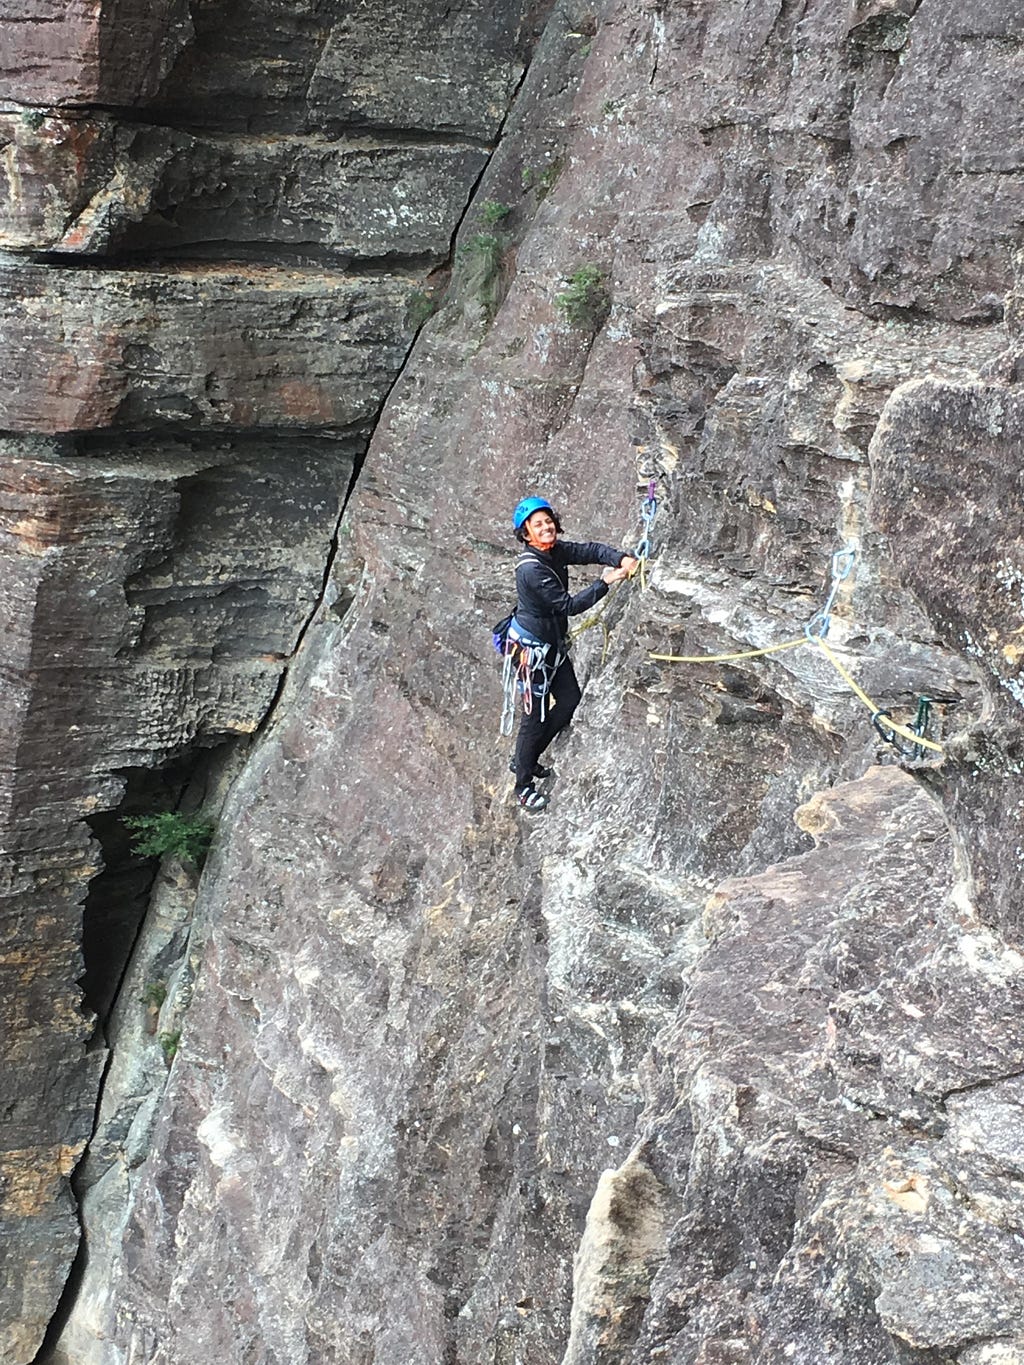 A woman rock climbing. She’s smiling and wearing a helmet